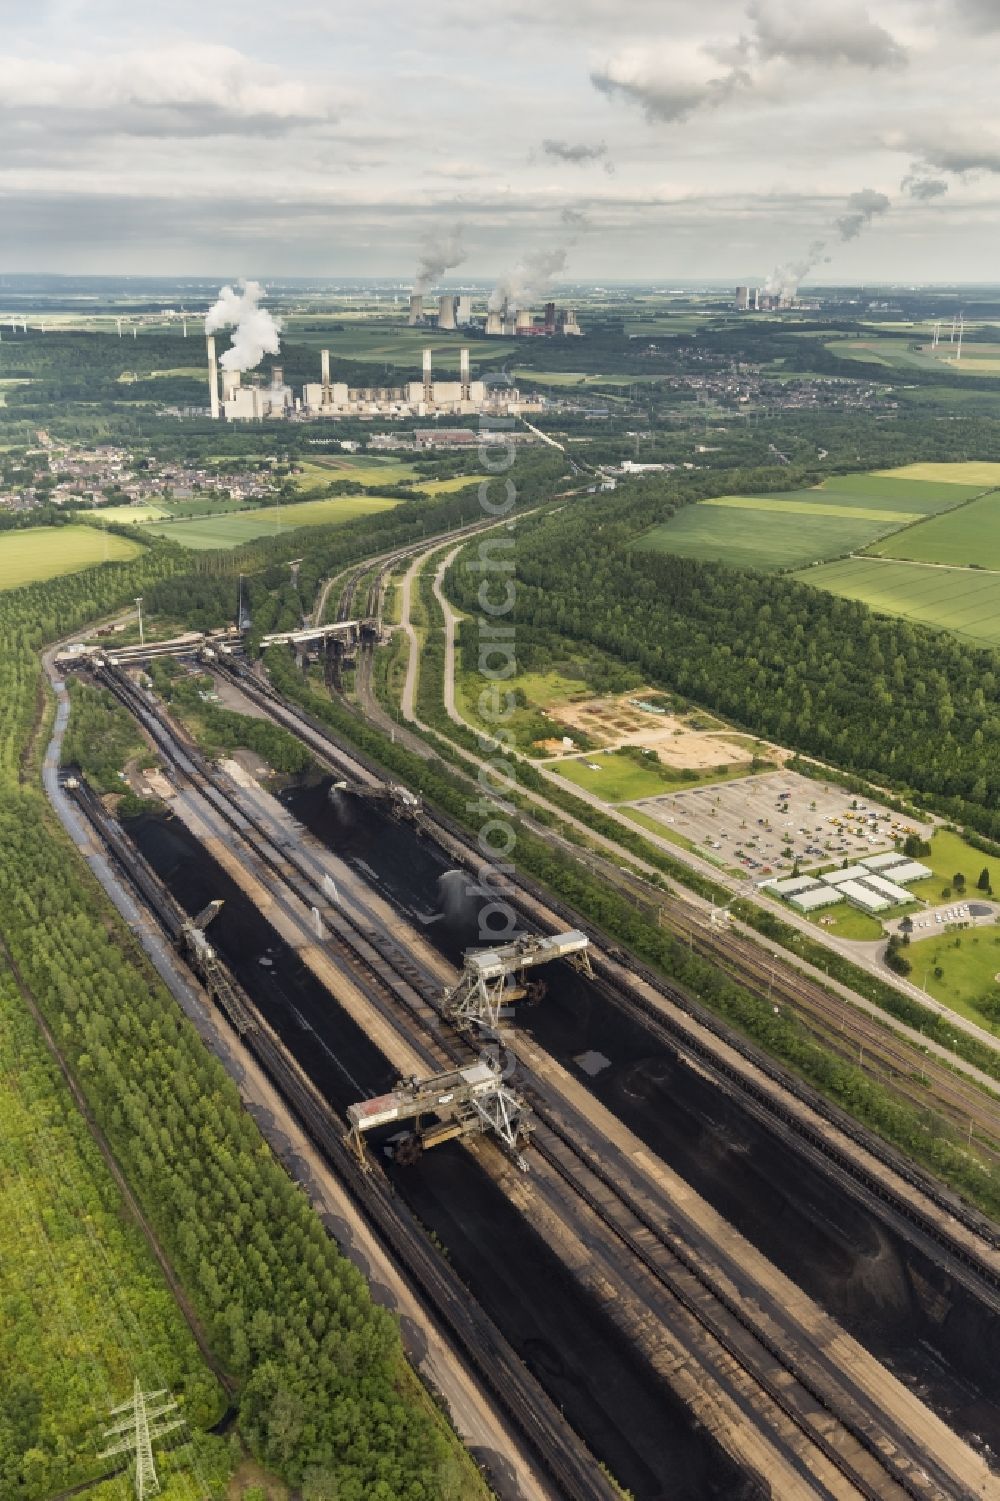 Aerial image Jüchen - Coal mixing plant to RWE lignite power plant at Friemersdorf Juechen in the state of North Rhine-Westphalia